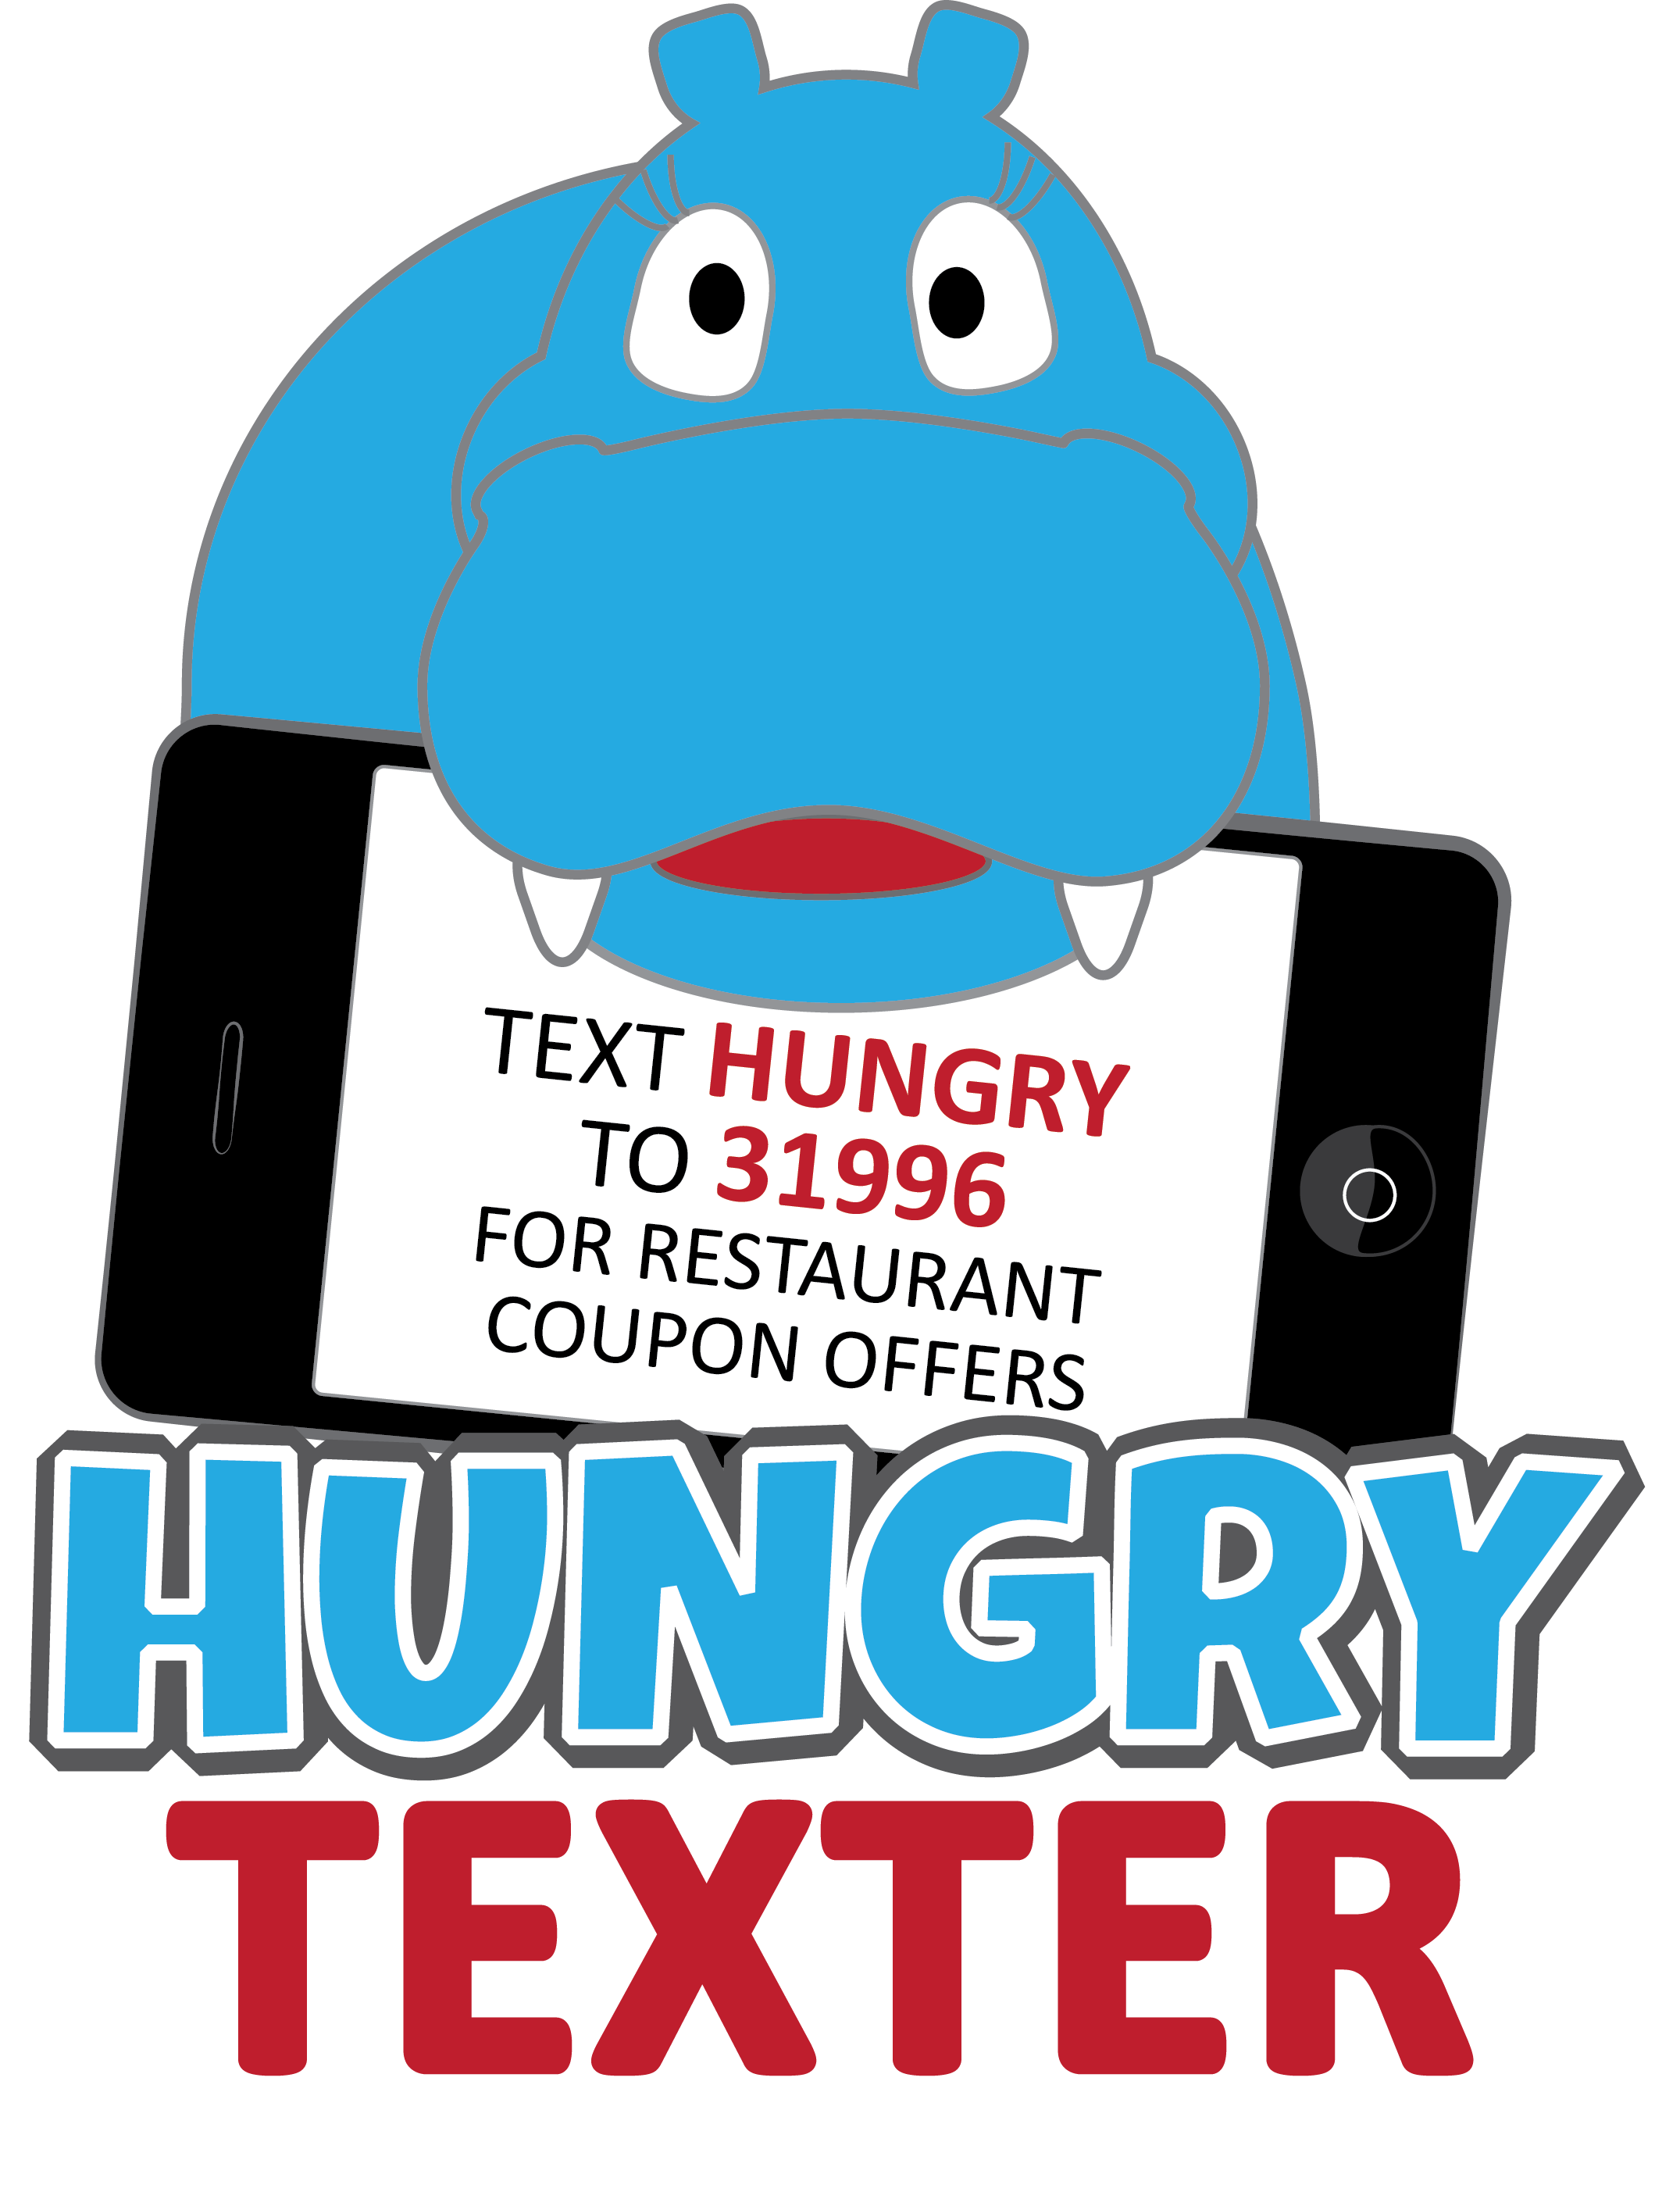 Hungry Texter Program